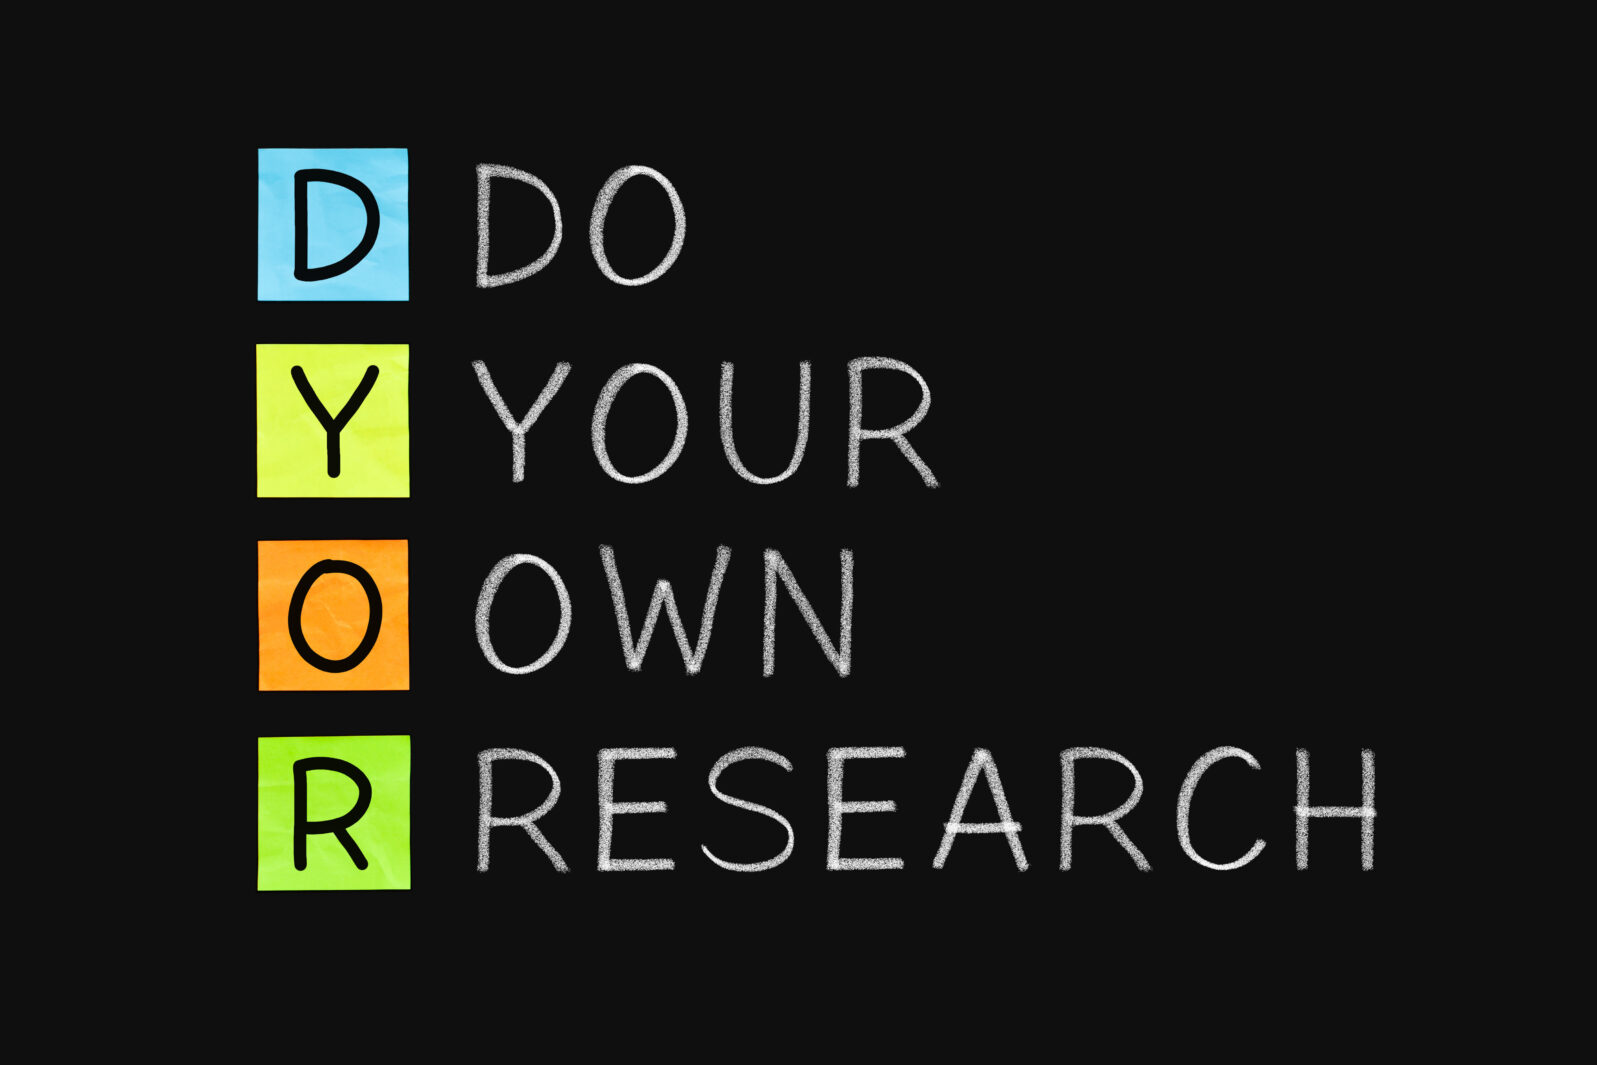 DYOR - Do Your Own Research Concept